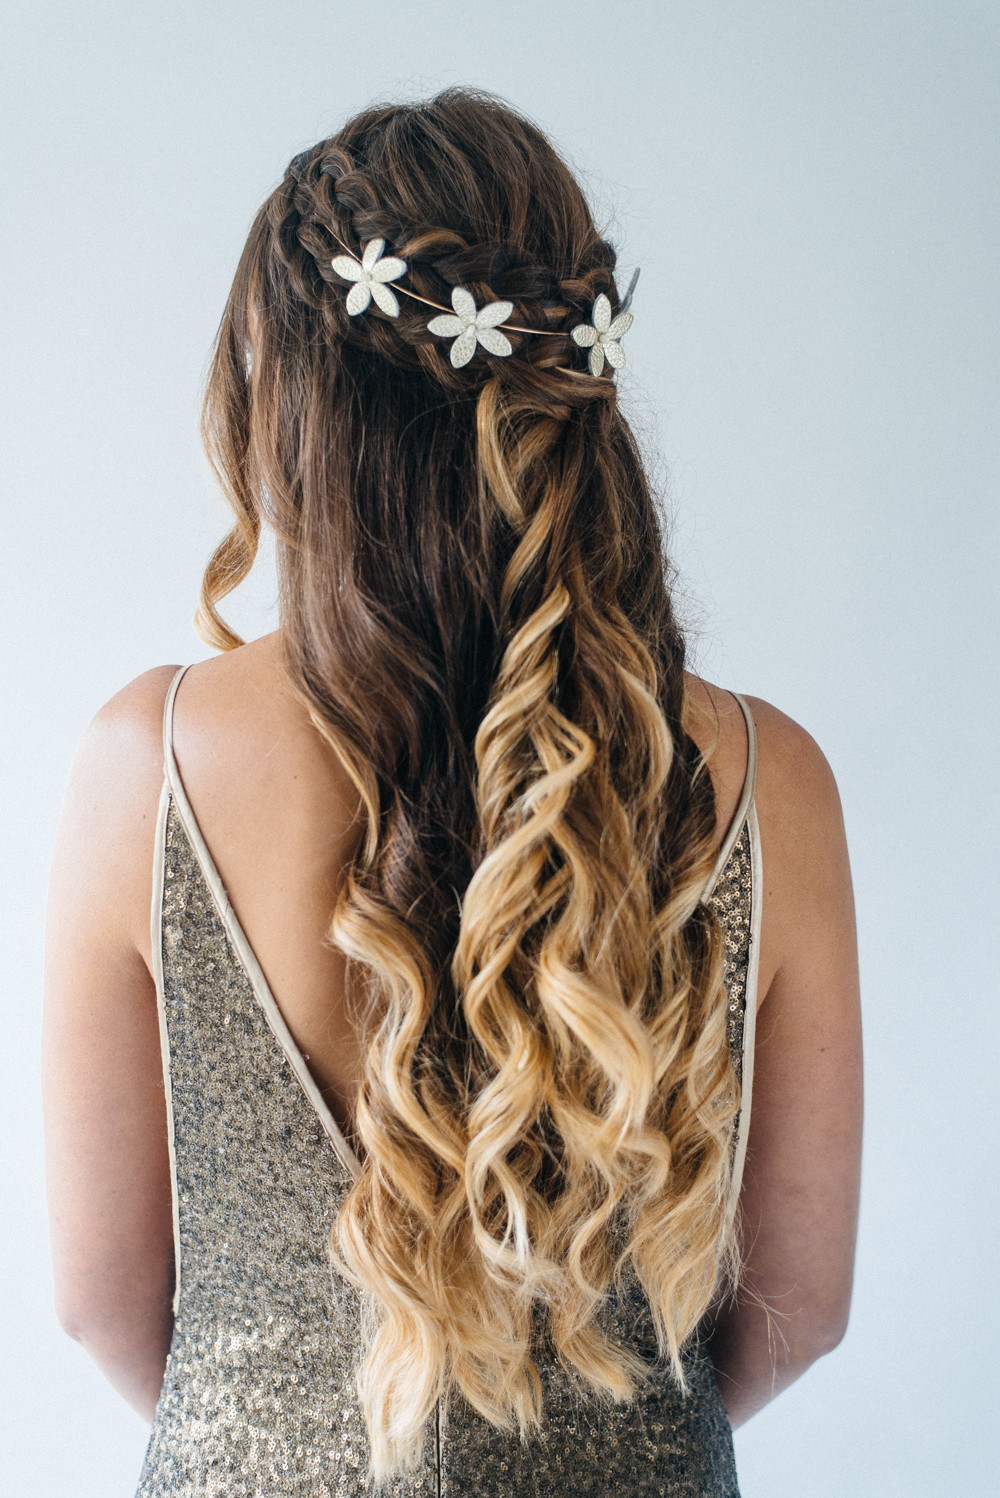 Down Hairstyles For Wedding
 Inspiration For Half Up Half Down Wedding Hair With